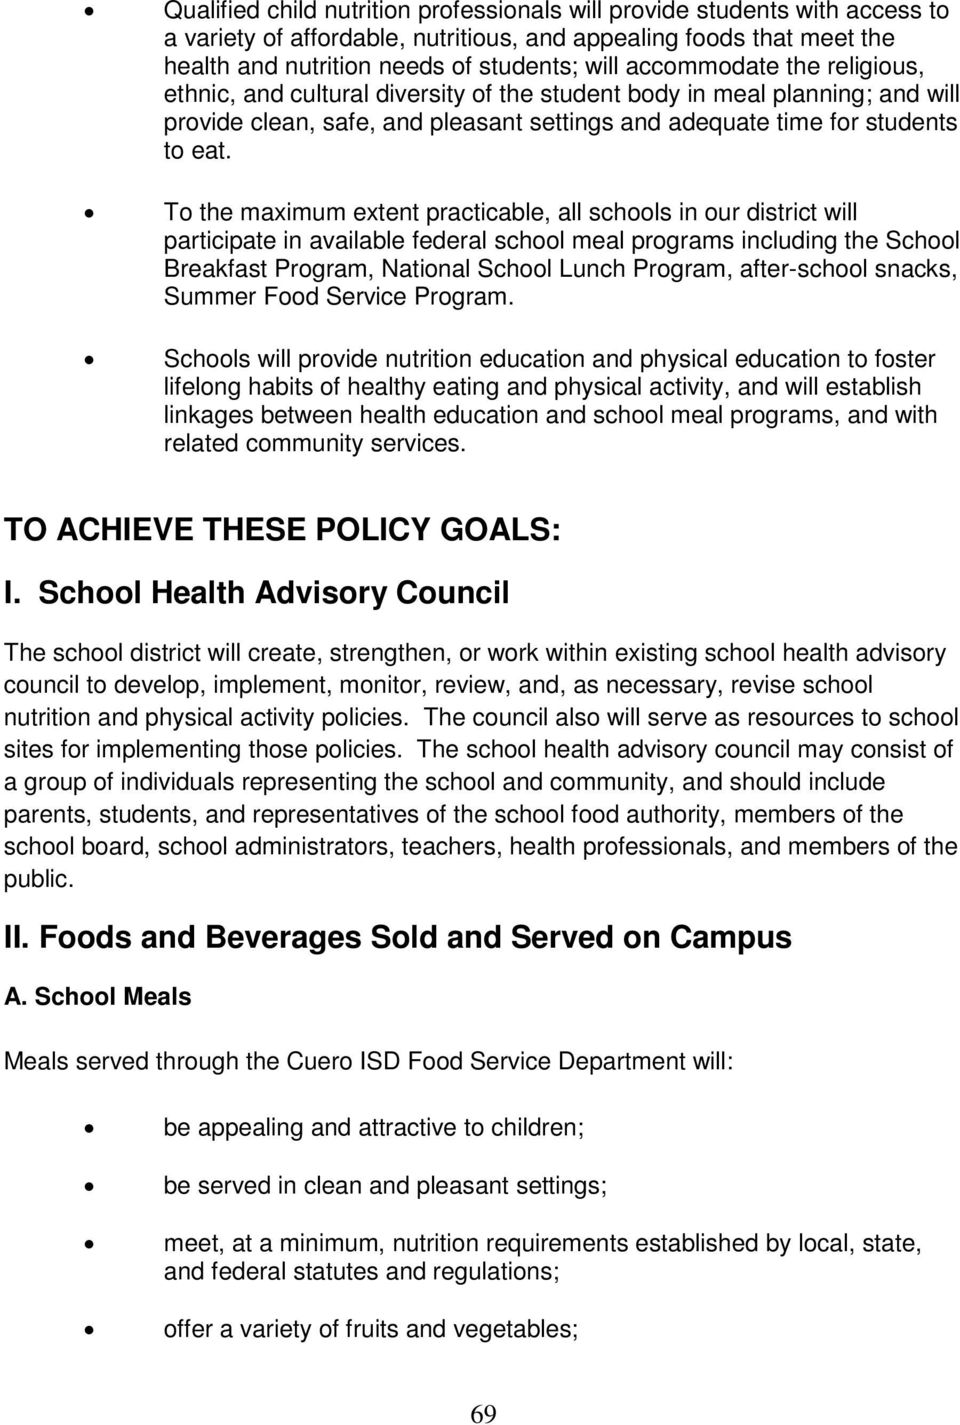 To the maximum extent practicable, all schools in our district will participate in available federal school meal programs including the School Breakfast Program, National School Lunch Program,